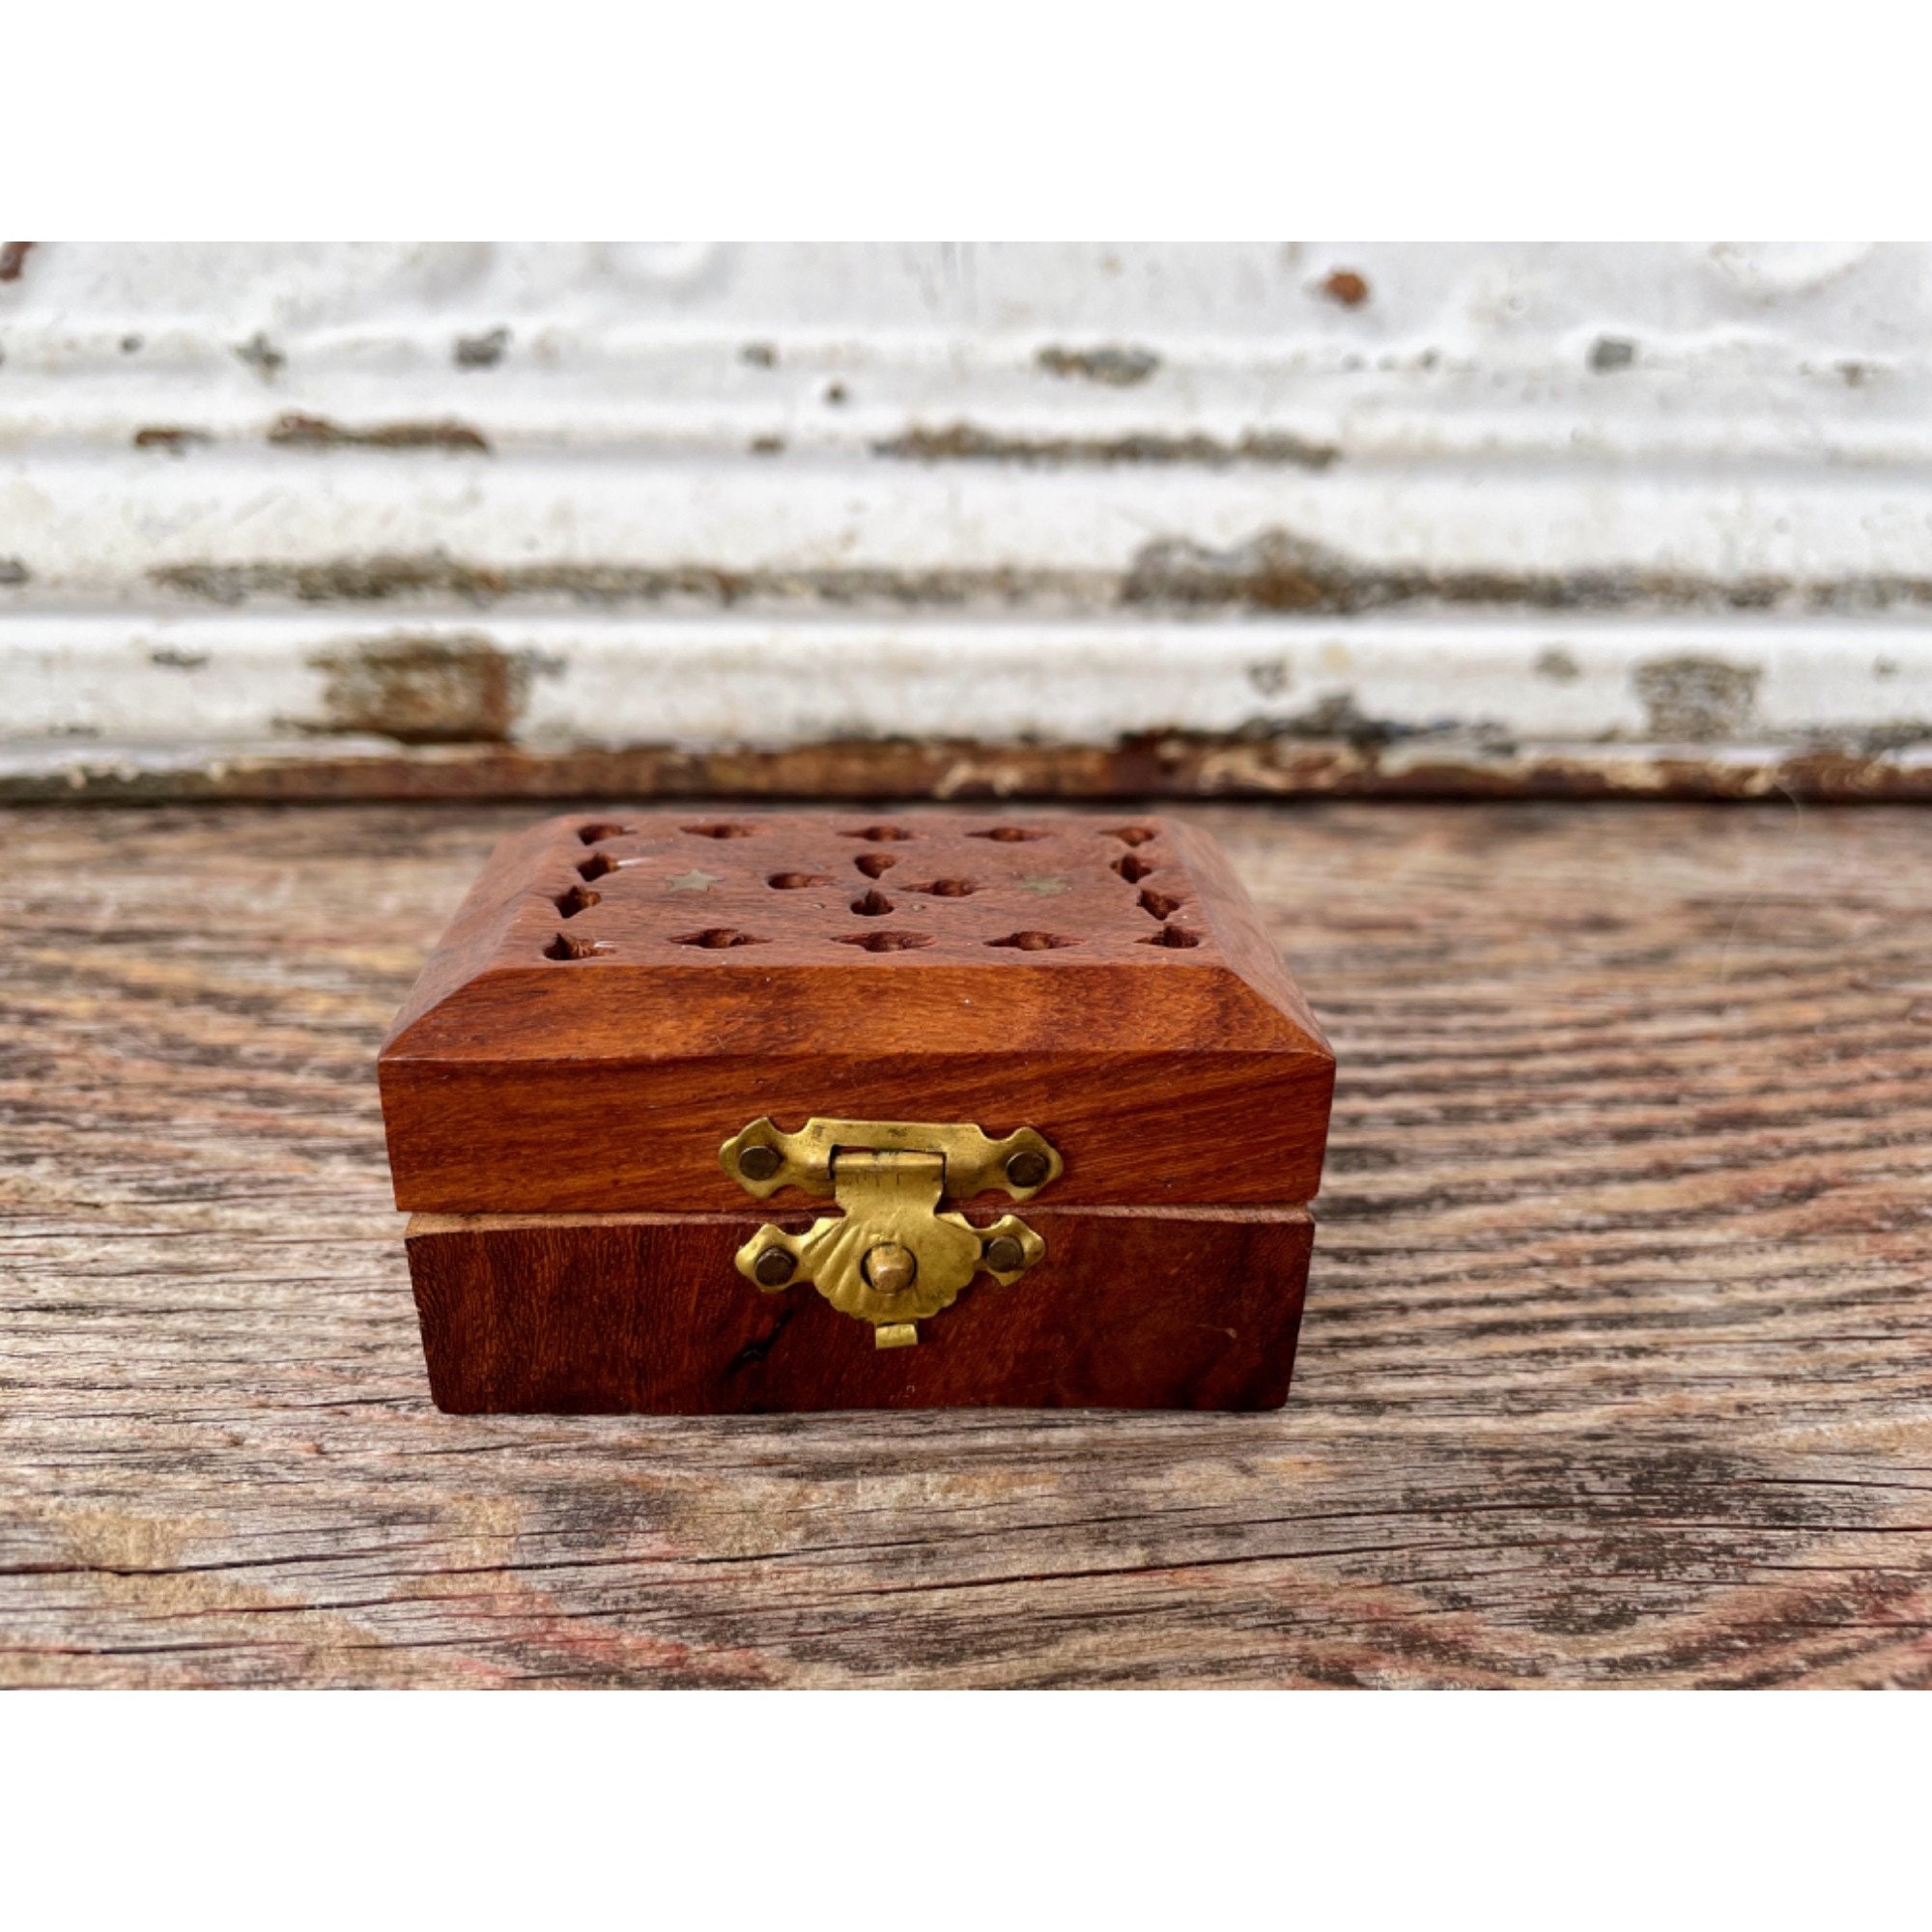 Incense Storage Box Including Incense and Holder Personalized Black Walnut  Portable 